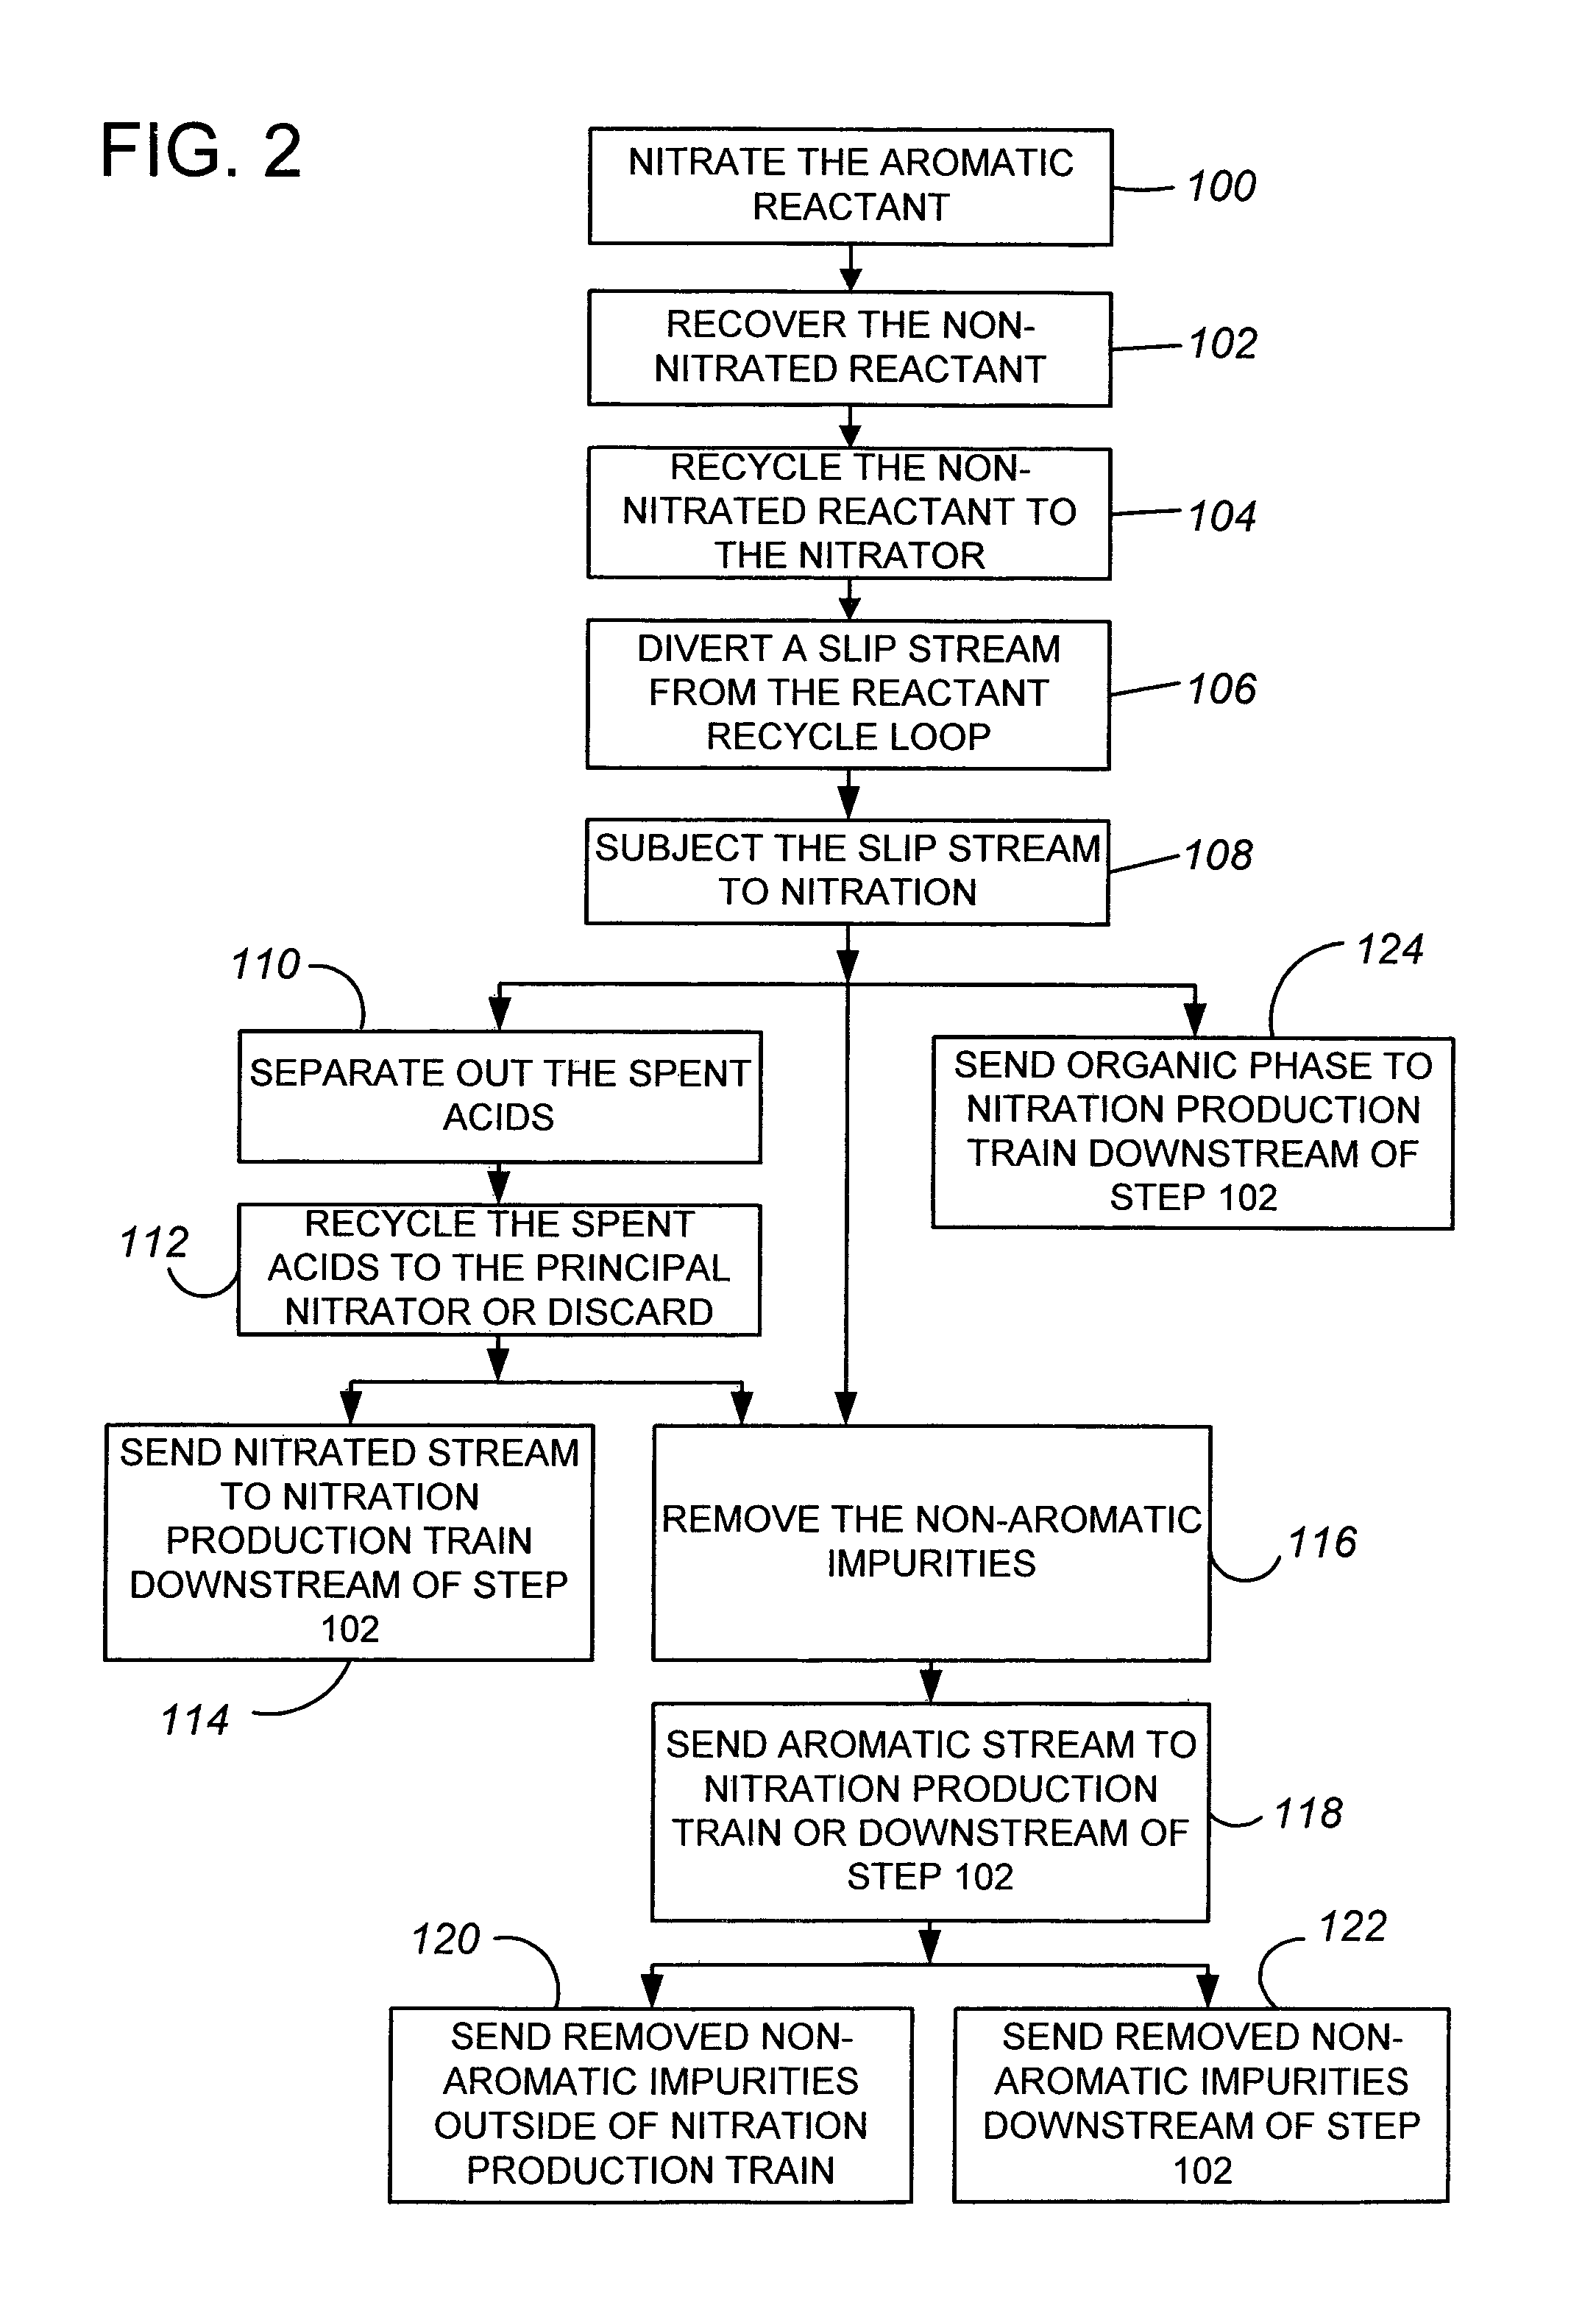 Removal of non-aromatic impurities from a nitration process